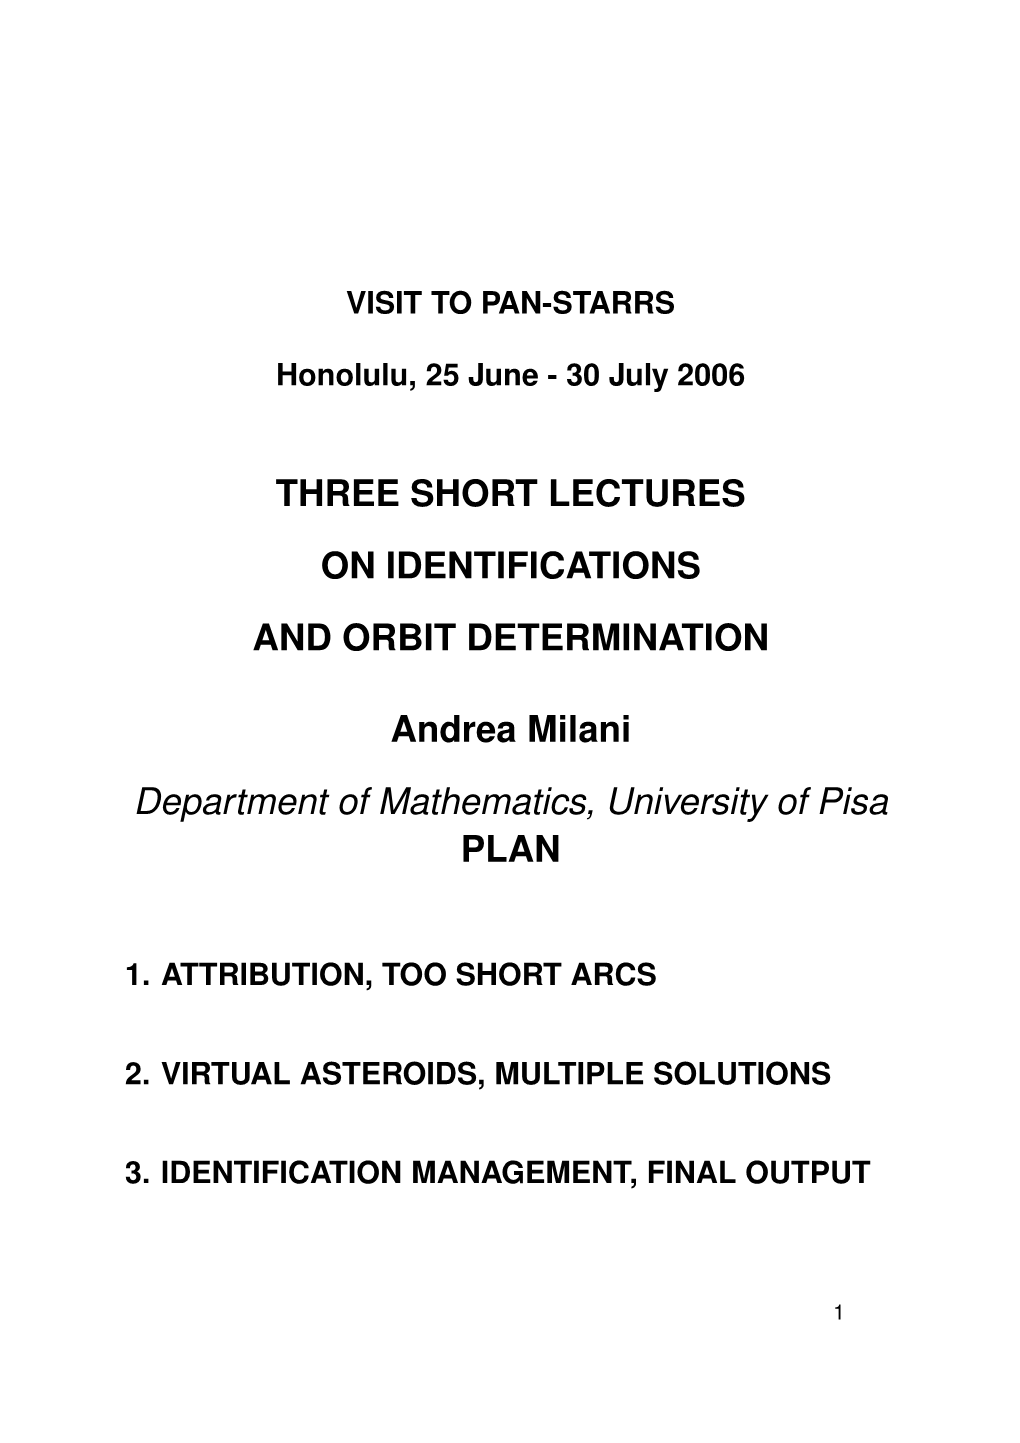 Three Short Lectures on Identifications and Orbit Determination